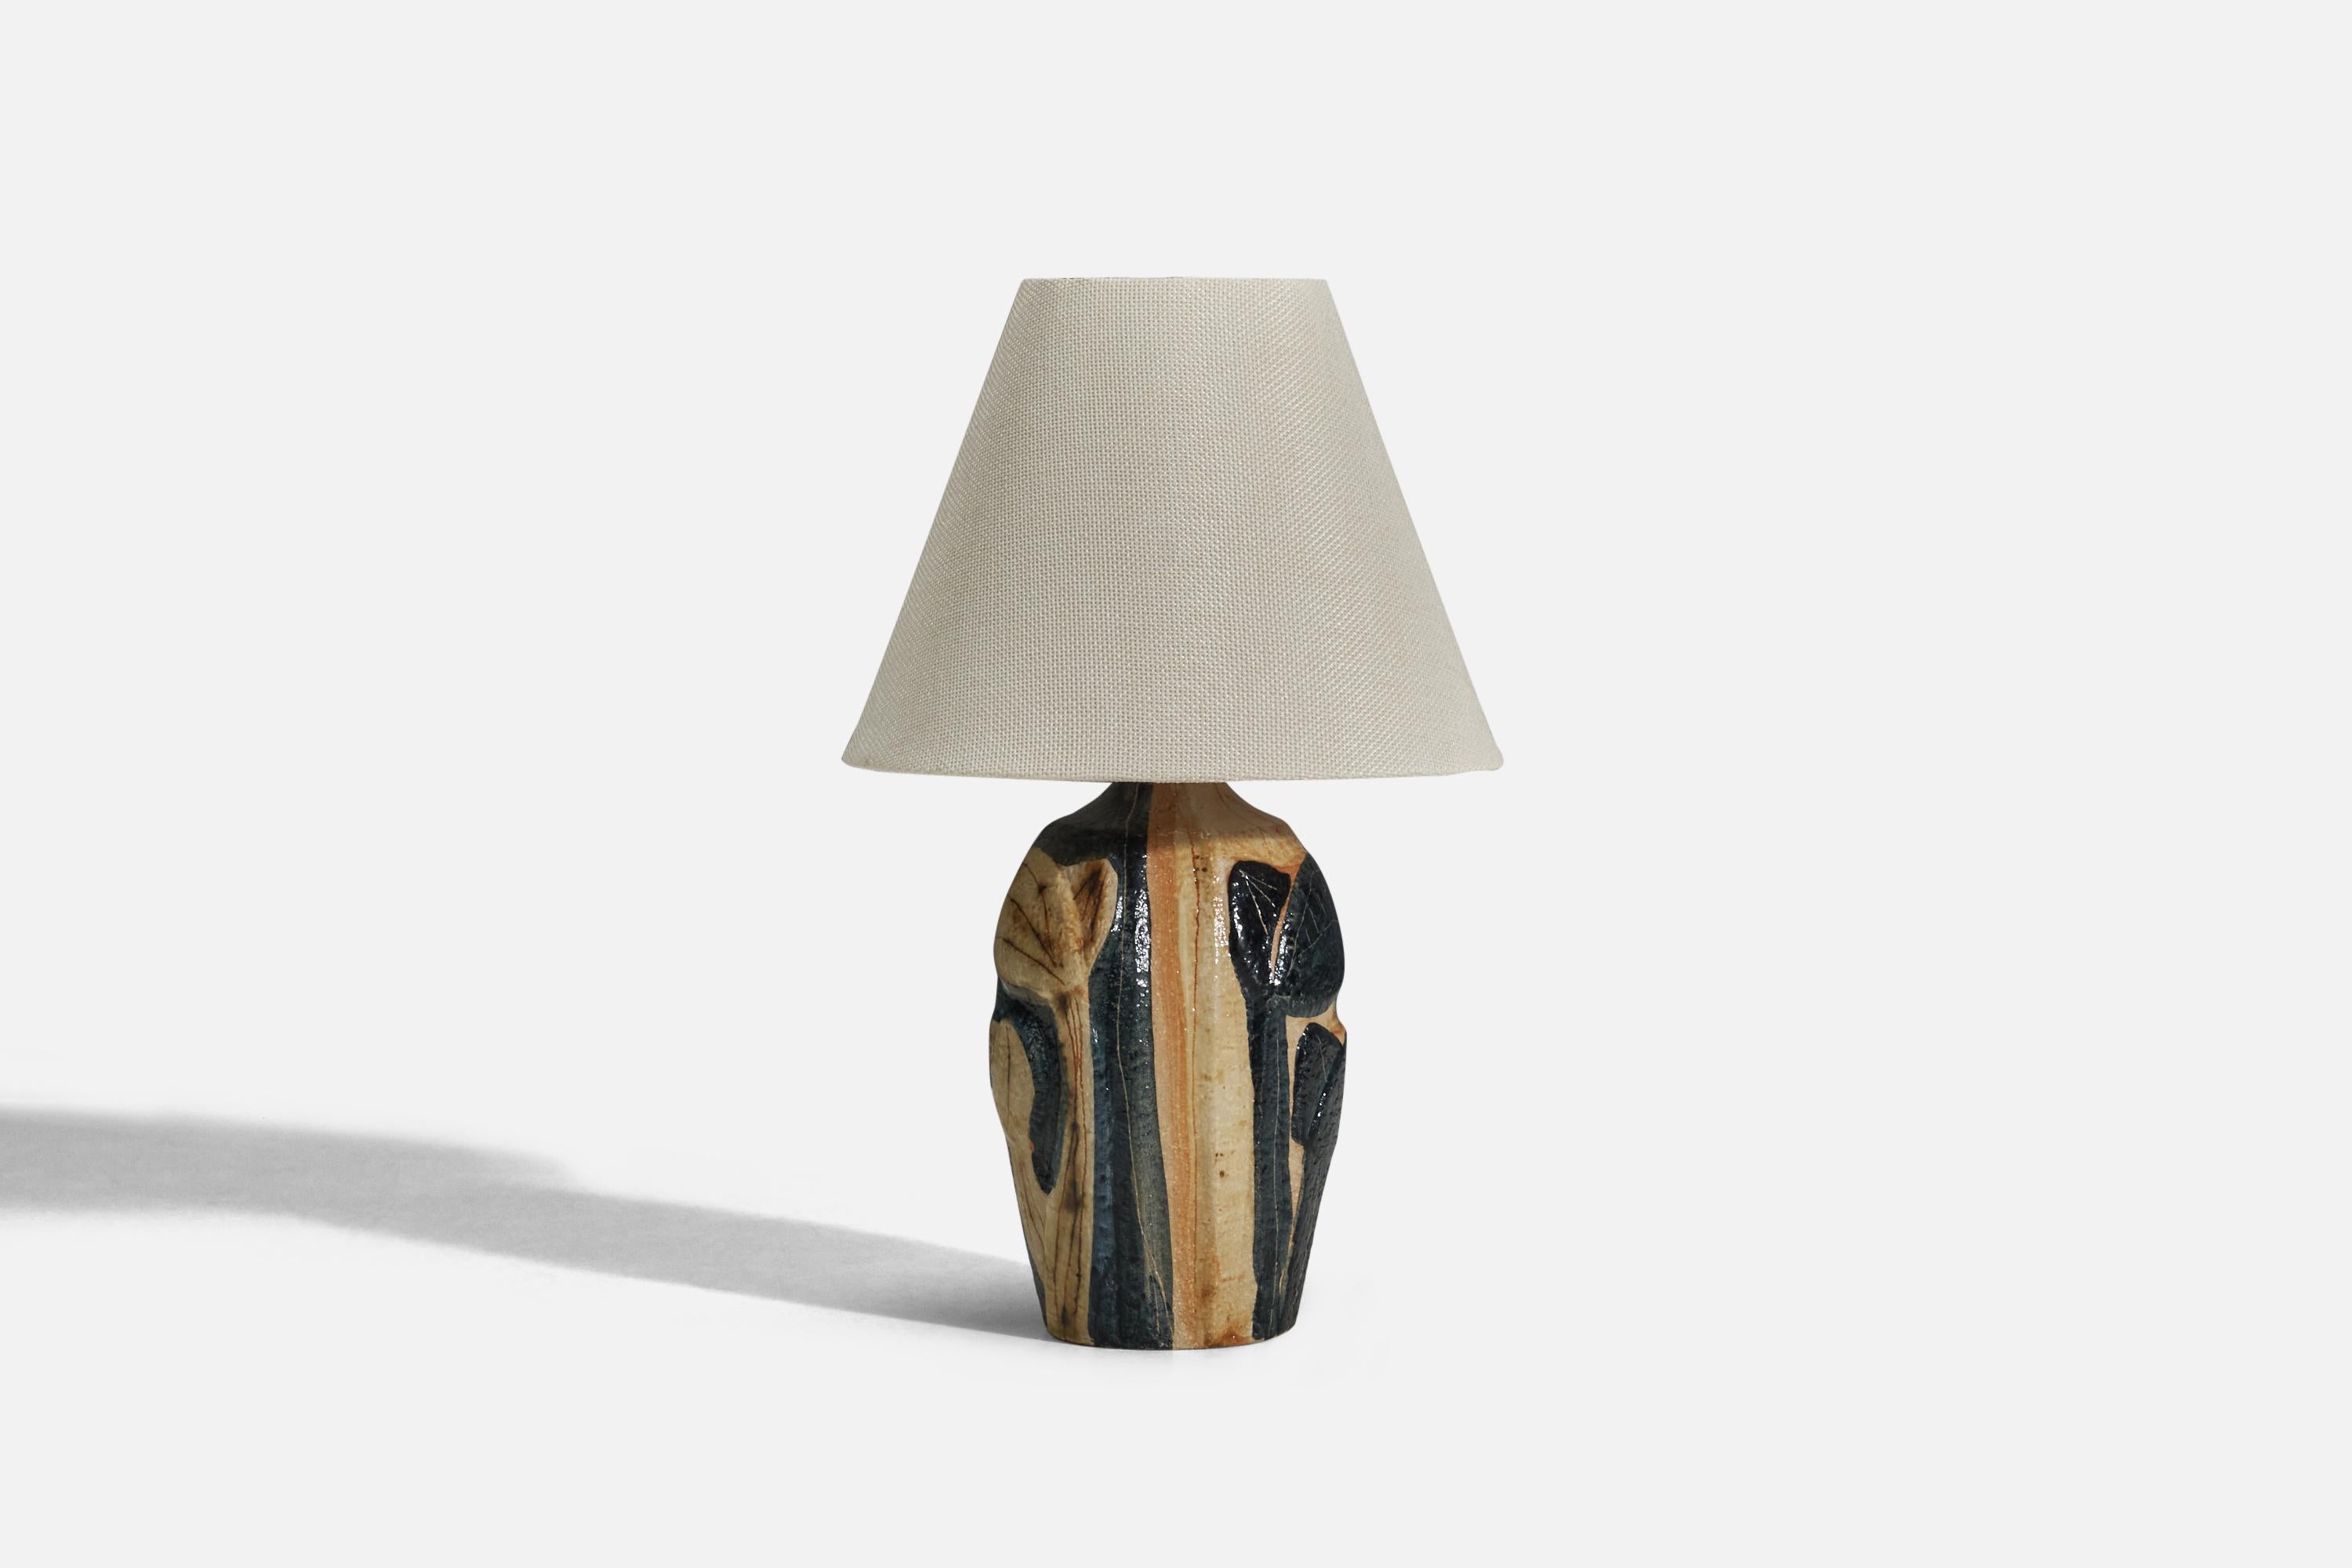 A green and cream glazed stoneware table lamp designed by Noomi Backhausen and produced by Søholm, Denmark, 1960s.

Sold without lampshade
Dimensions of lamp (inches) : 9.62 x 4.43 x 4.43 (height x width x depth)
Dimensions of lampshade (inches)